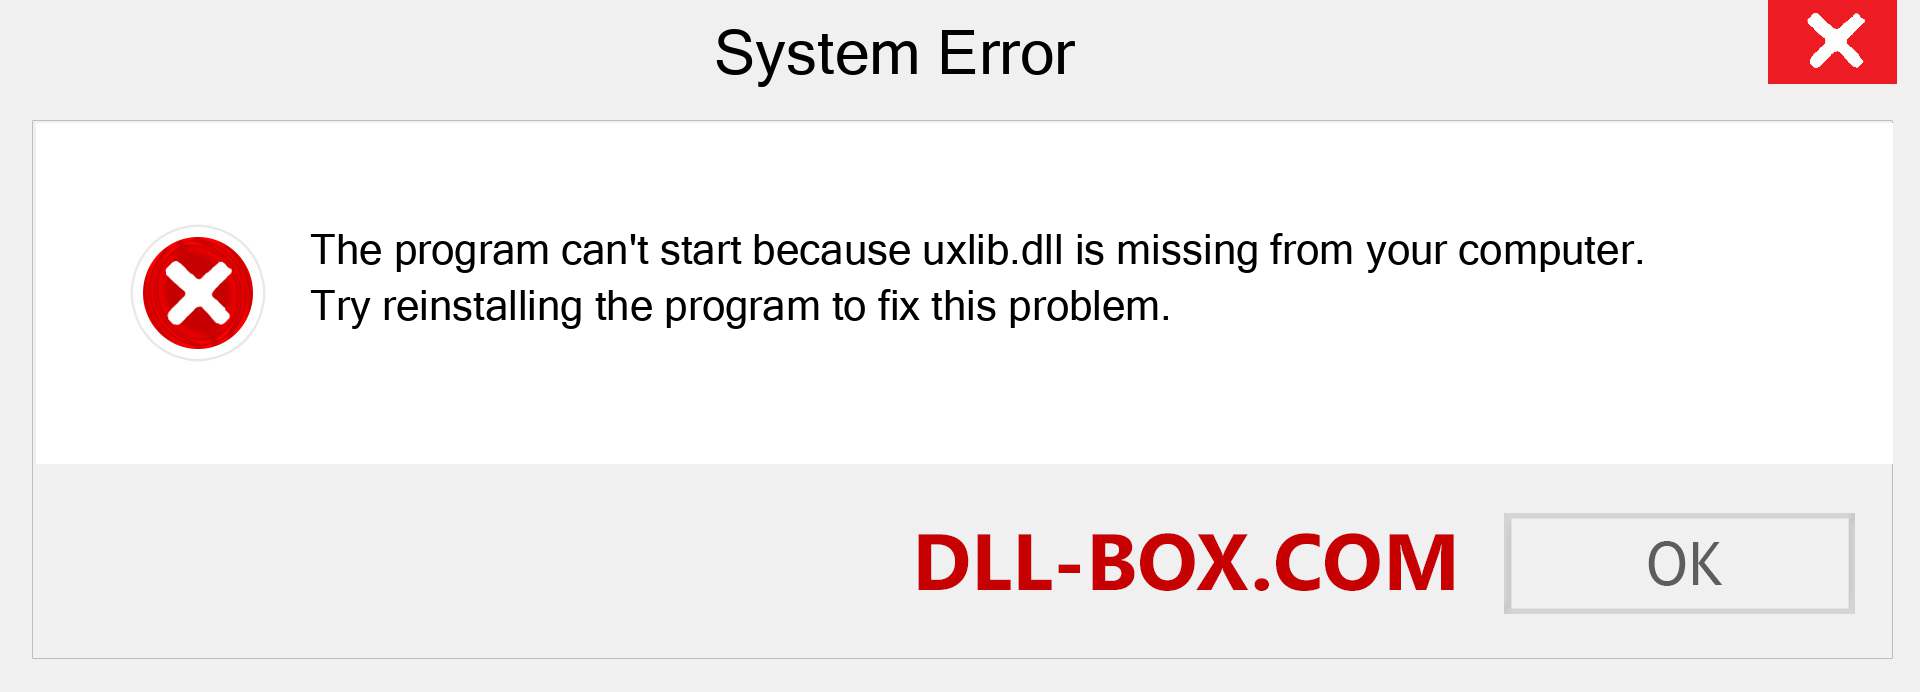  uxlib.dll file is missing?. Download for Windows 7, 8, 10 - Fix  uxlib dll Missing Error on Windows, photos, images